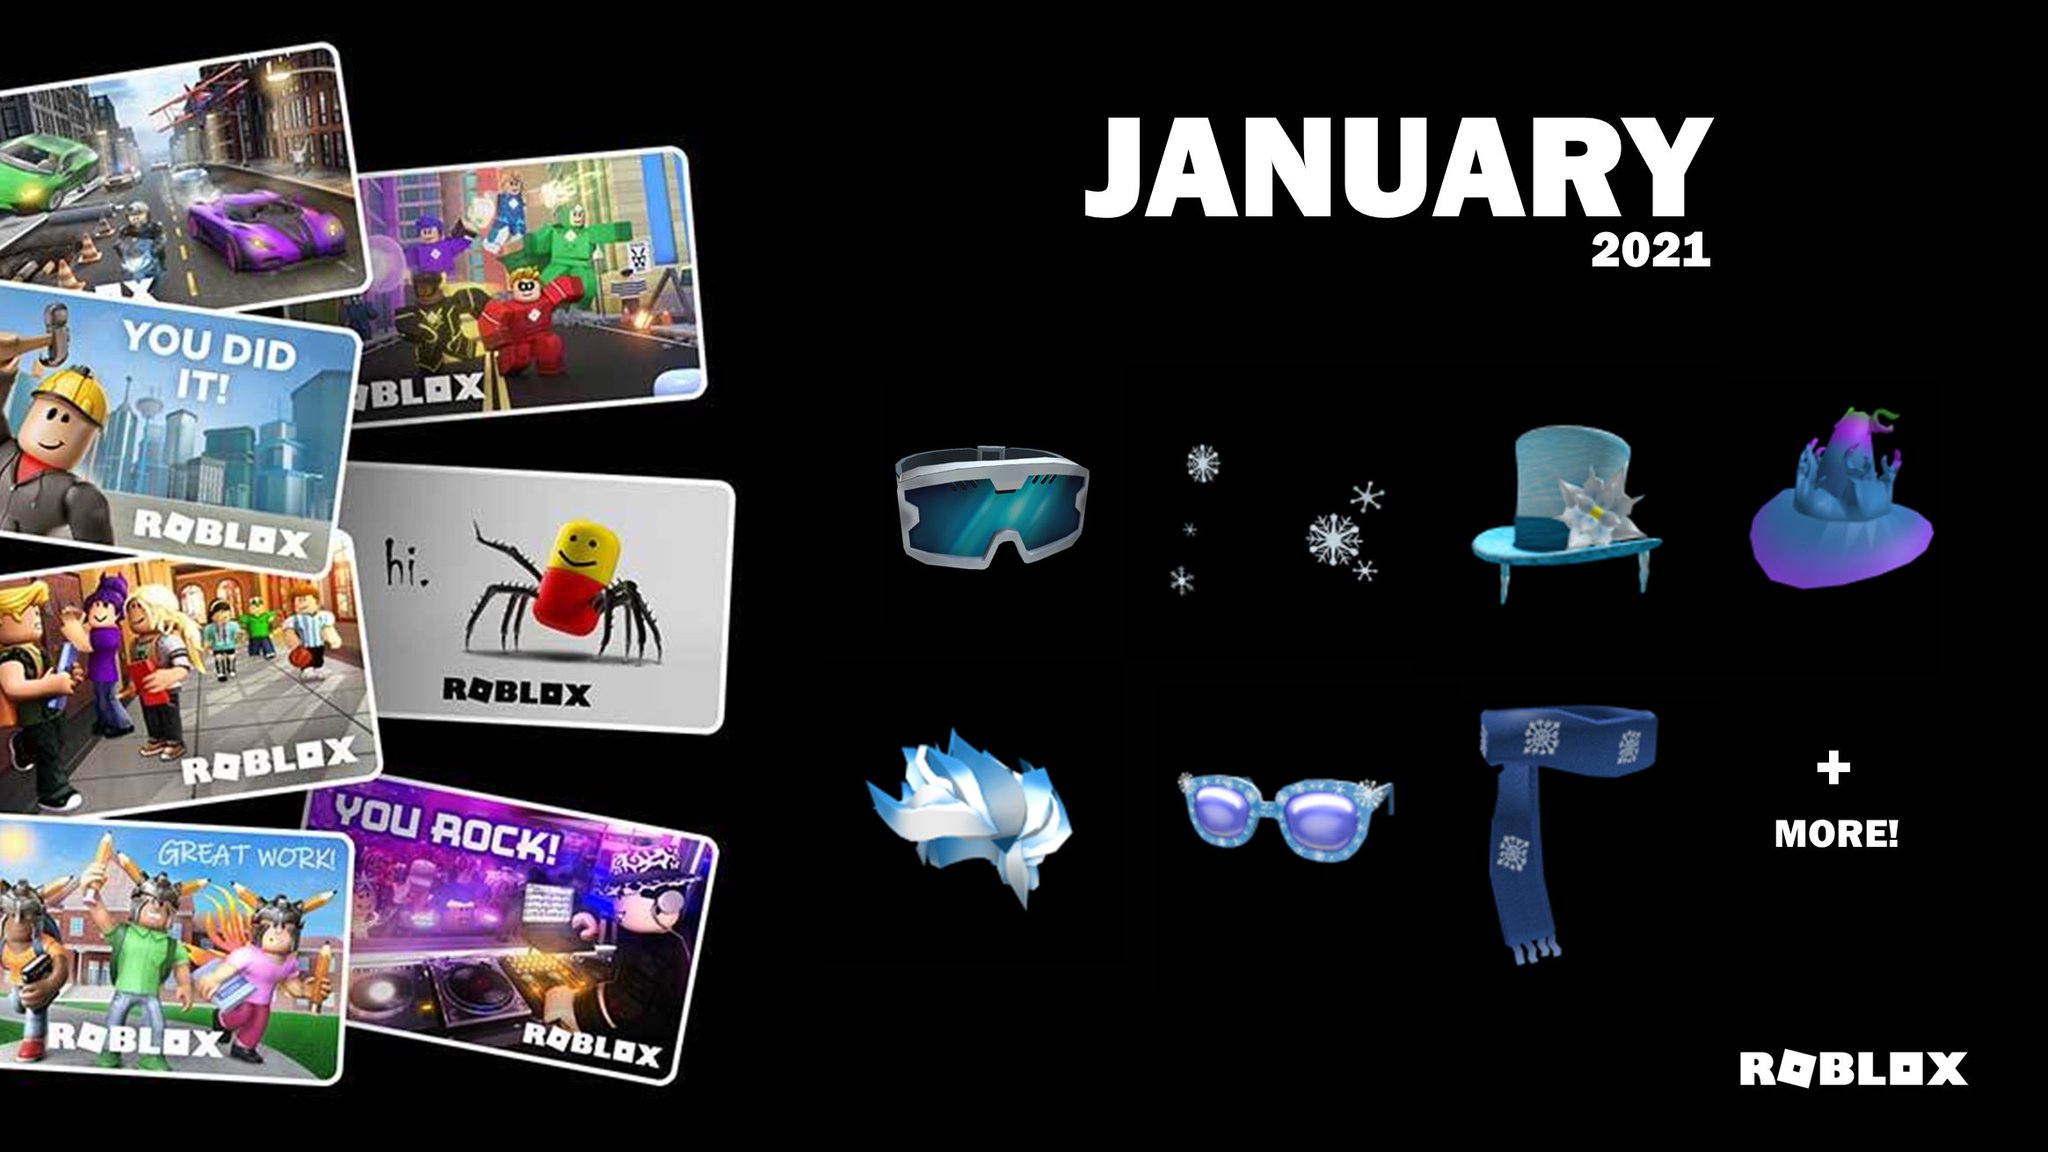 Bloxy News On Twitter The Roblox Gift Card Virtual Items And Their Corresponding Stores For January 2021 Are Now Available Check Them Out Here Https T Co Pujwqlz5yt Purchase A Gift Card - add robux to account with gift card